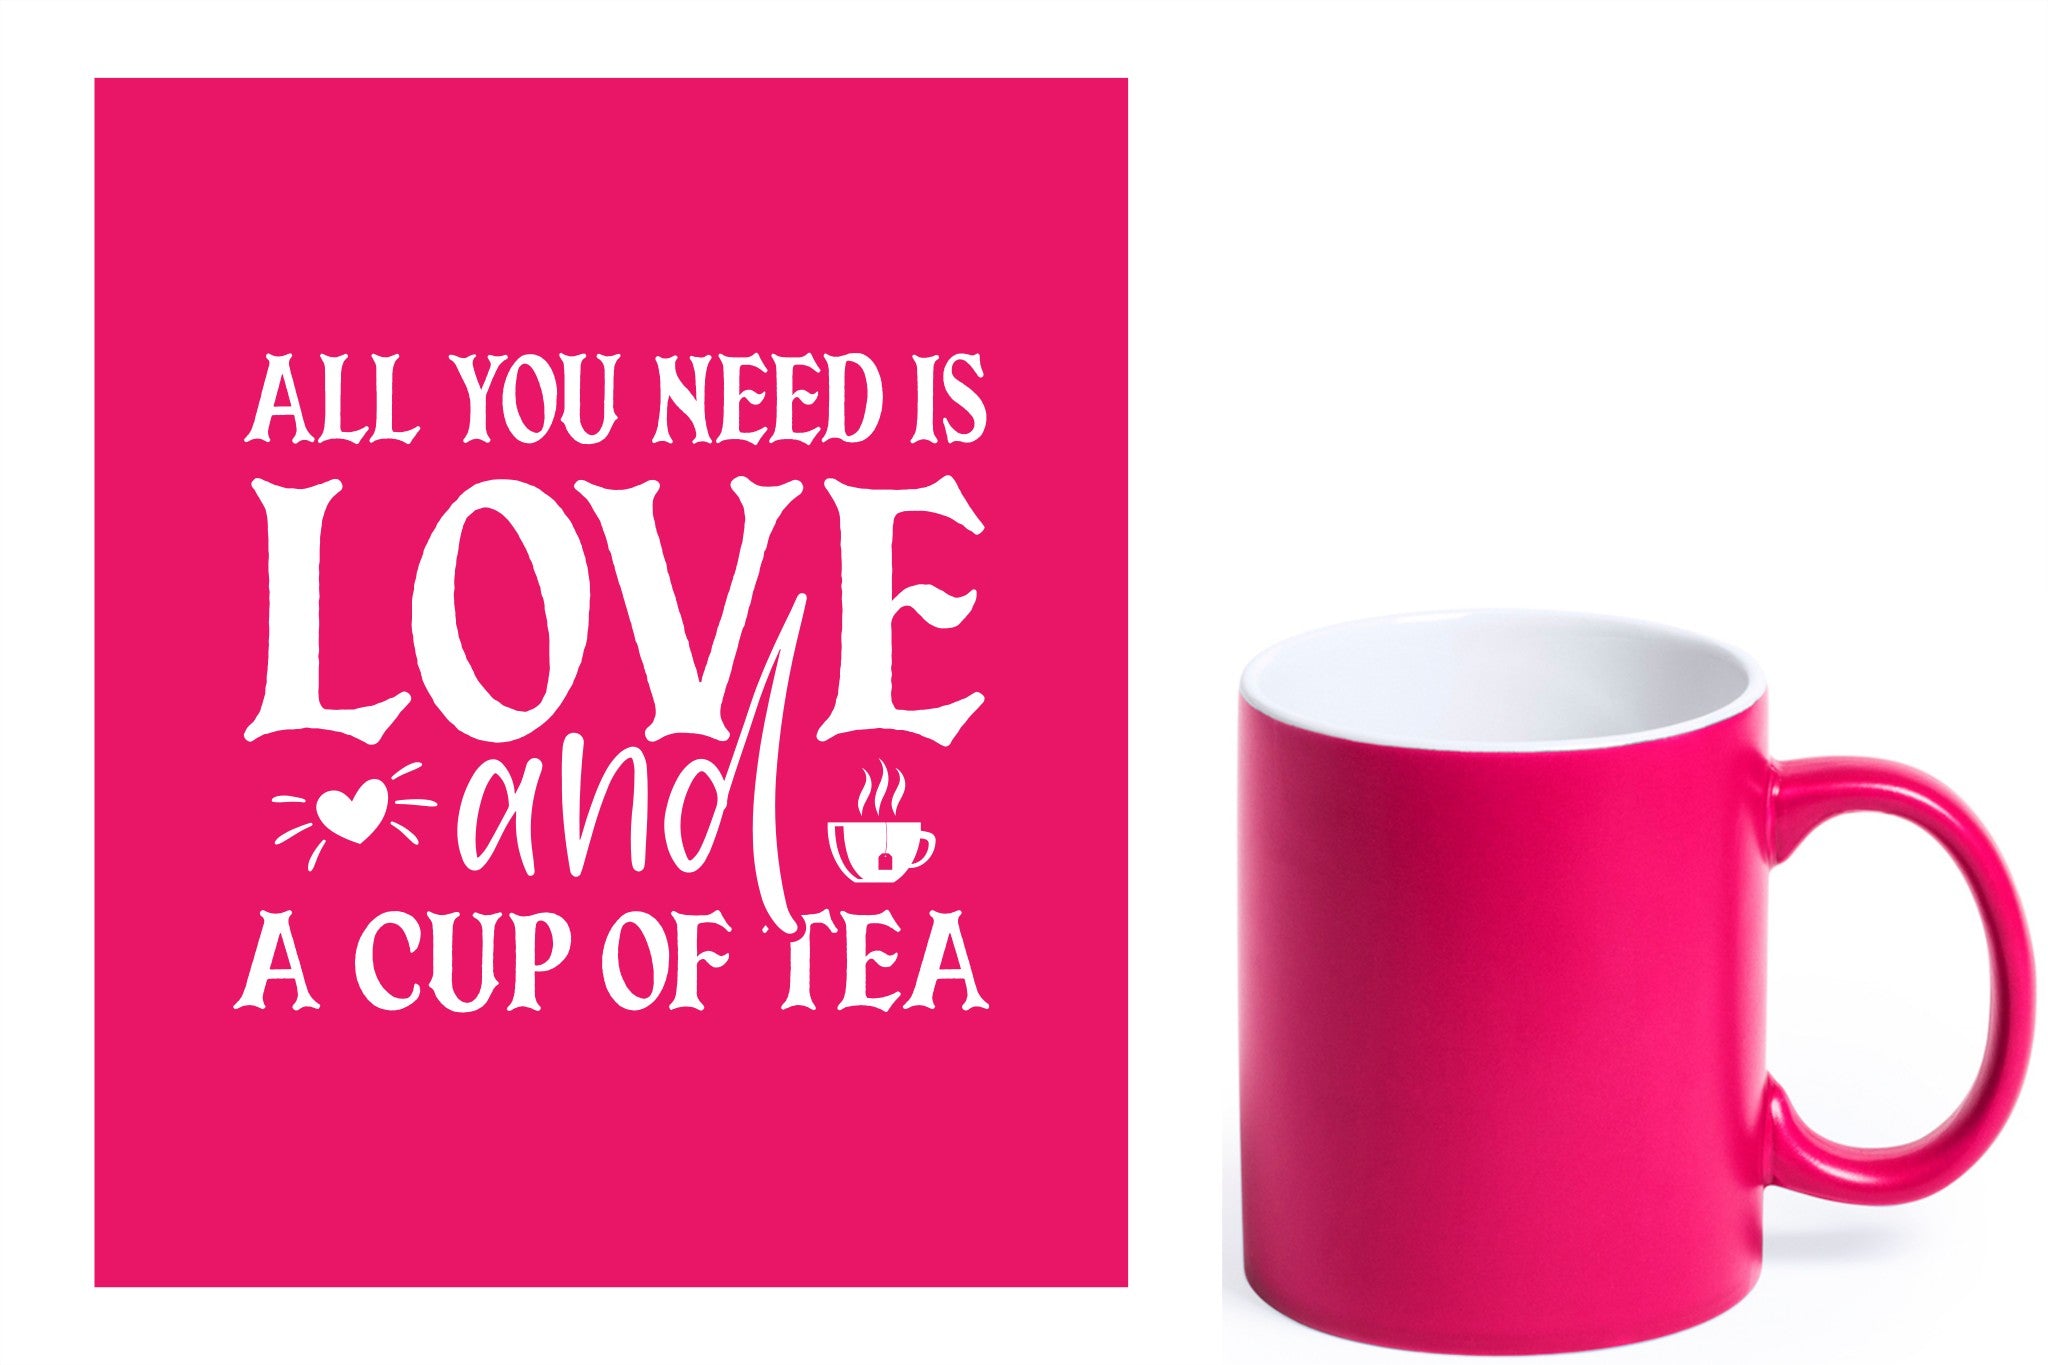 fuchsia keramische mok met witte gravure  'All you need is love and a cup of tea'.